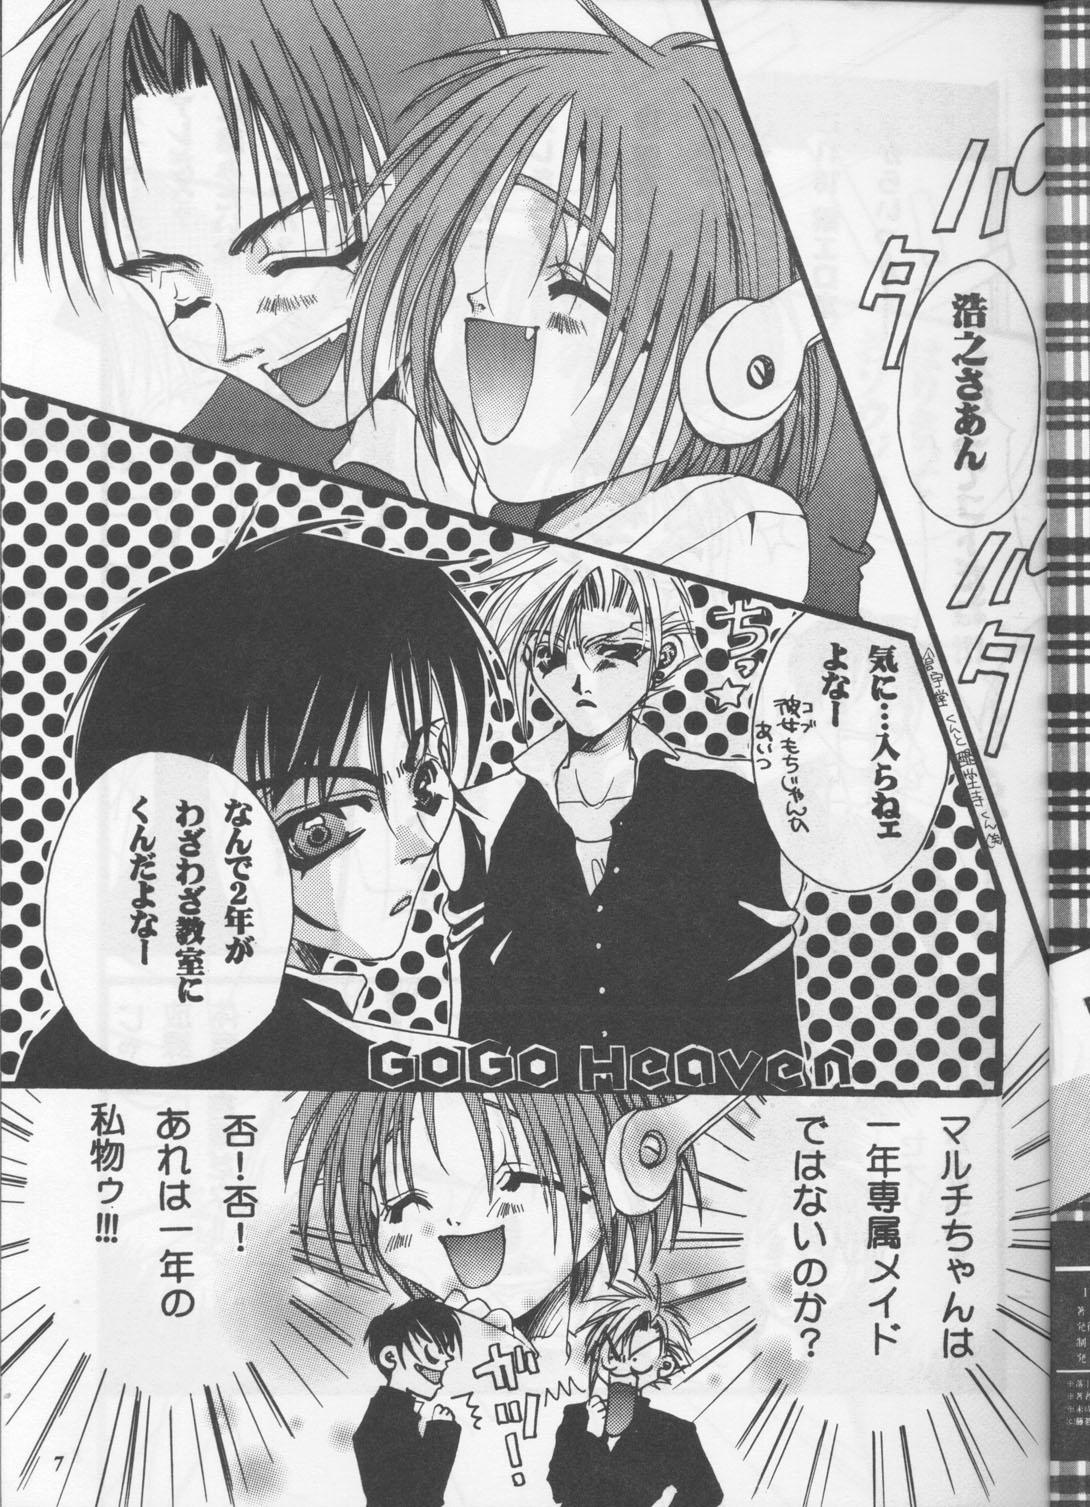 Spoon PSYCHEDELIC PINK - Cardcaptor sakura To heart Slayers Sorcerous stabber orphen Fuck Com - Page 6